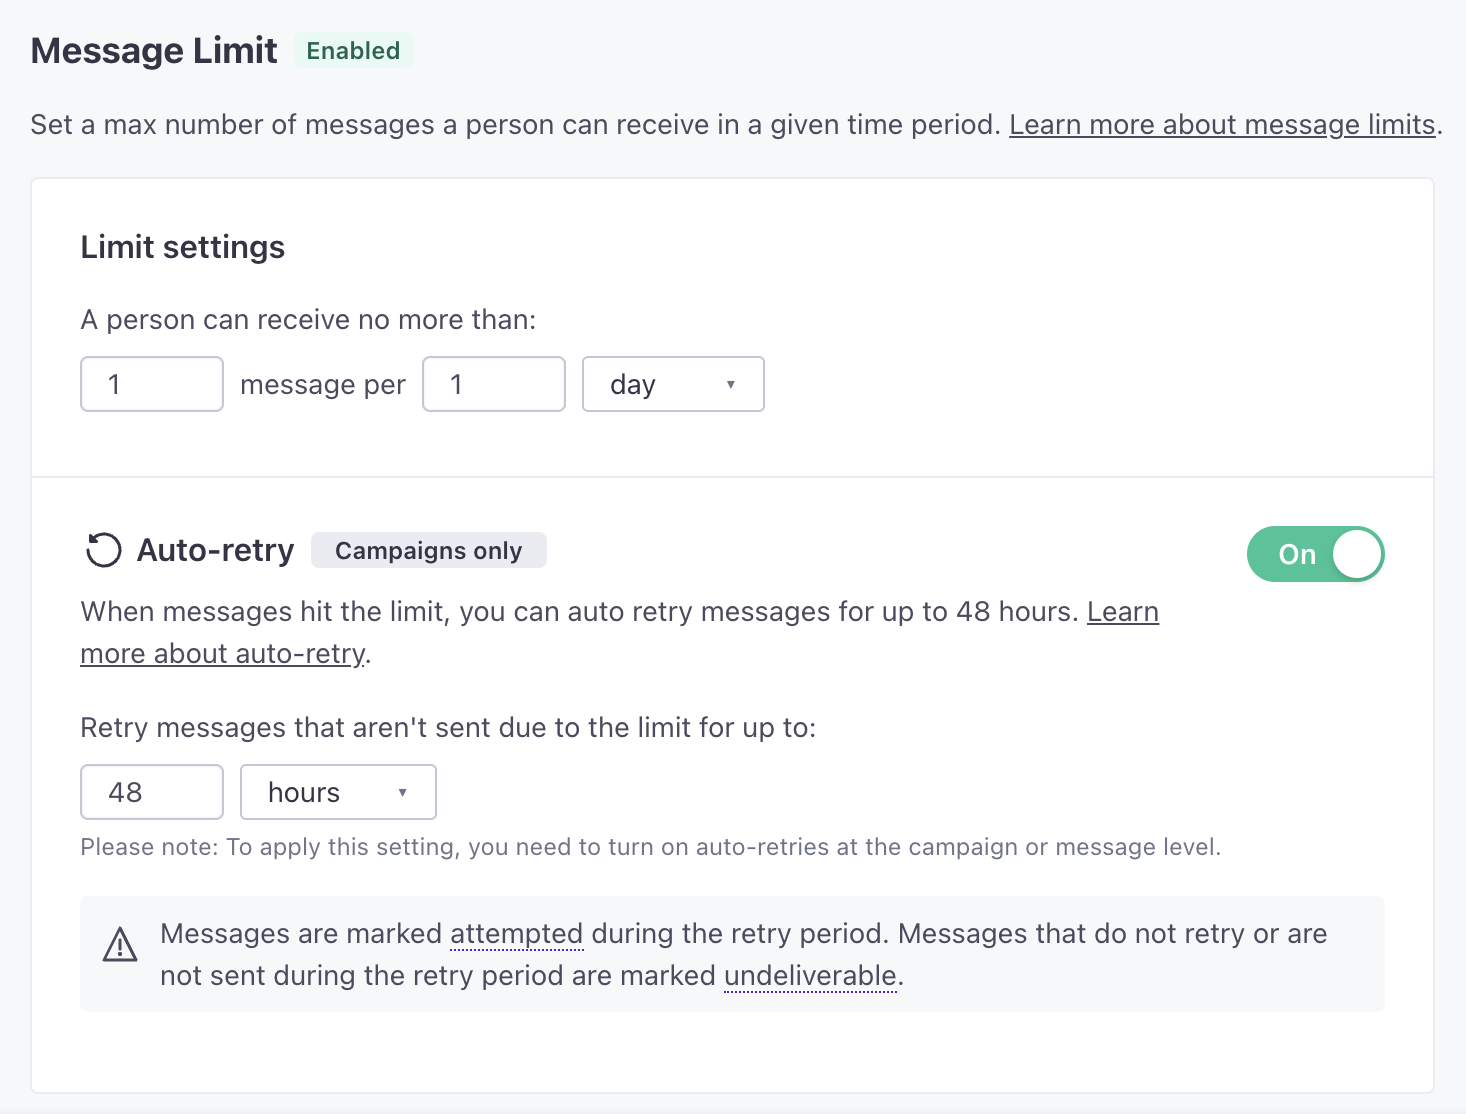 At the workspace level, a message limit and auto-retry time period are set. A person can receive no more than 1 message per day. The system will try to send the message again for up to 48 hours.